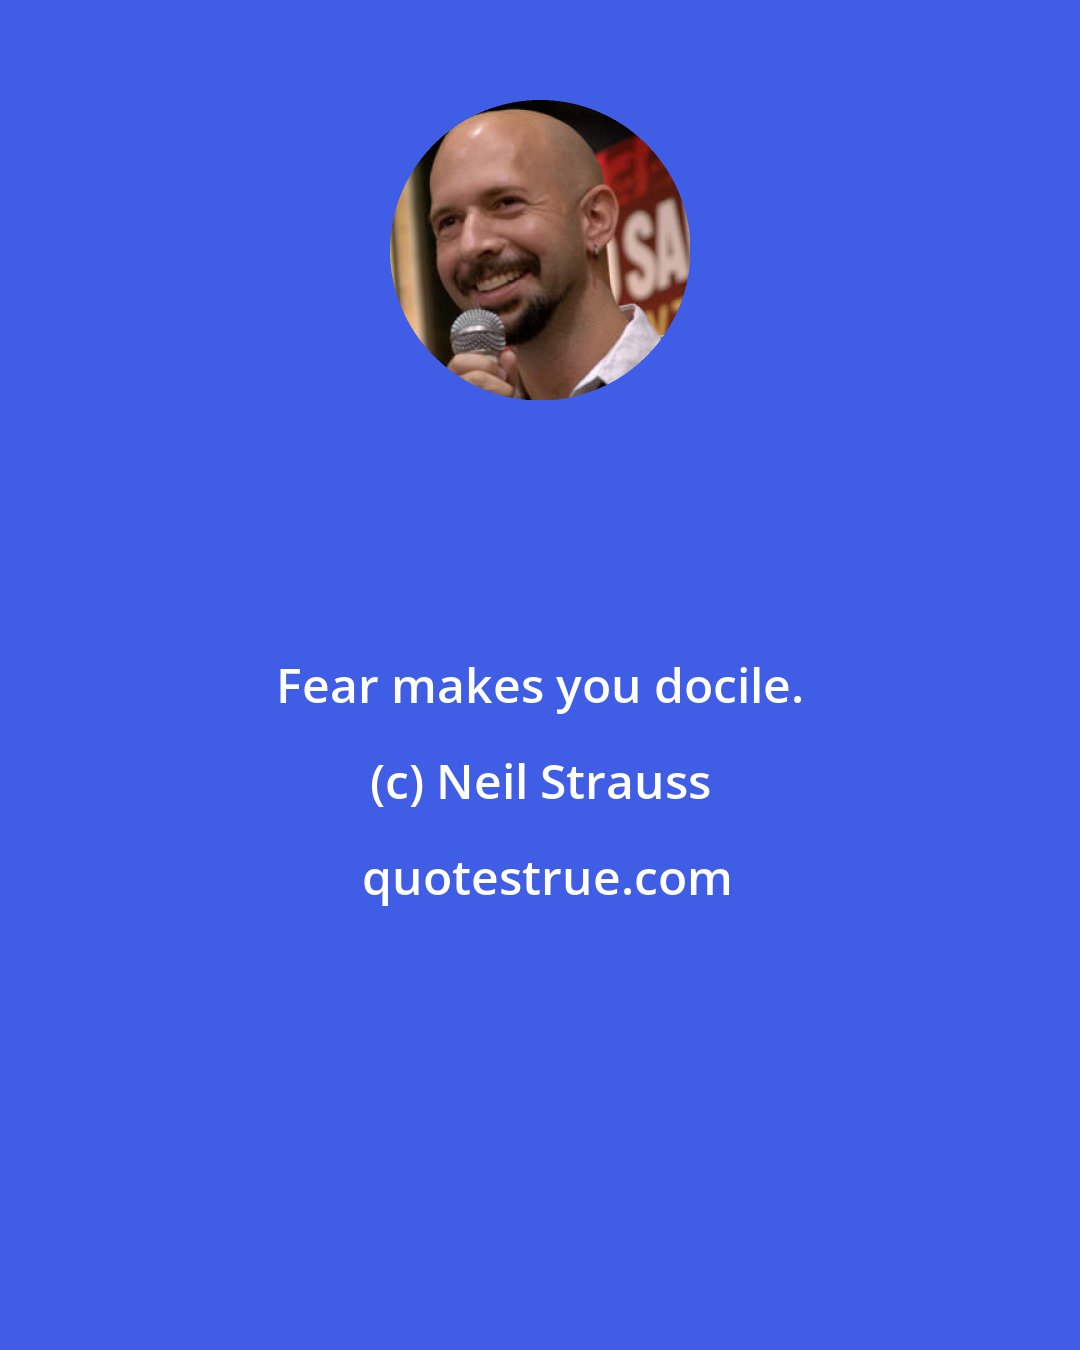 Neil Strauss: Fear makes you docile.